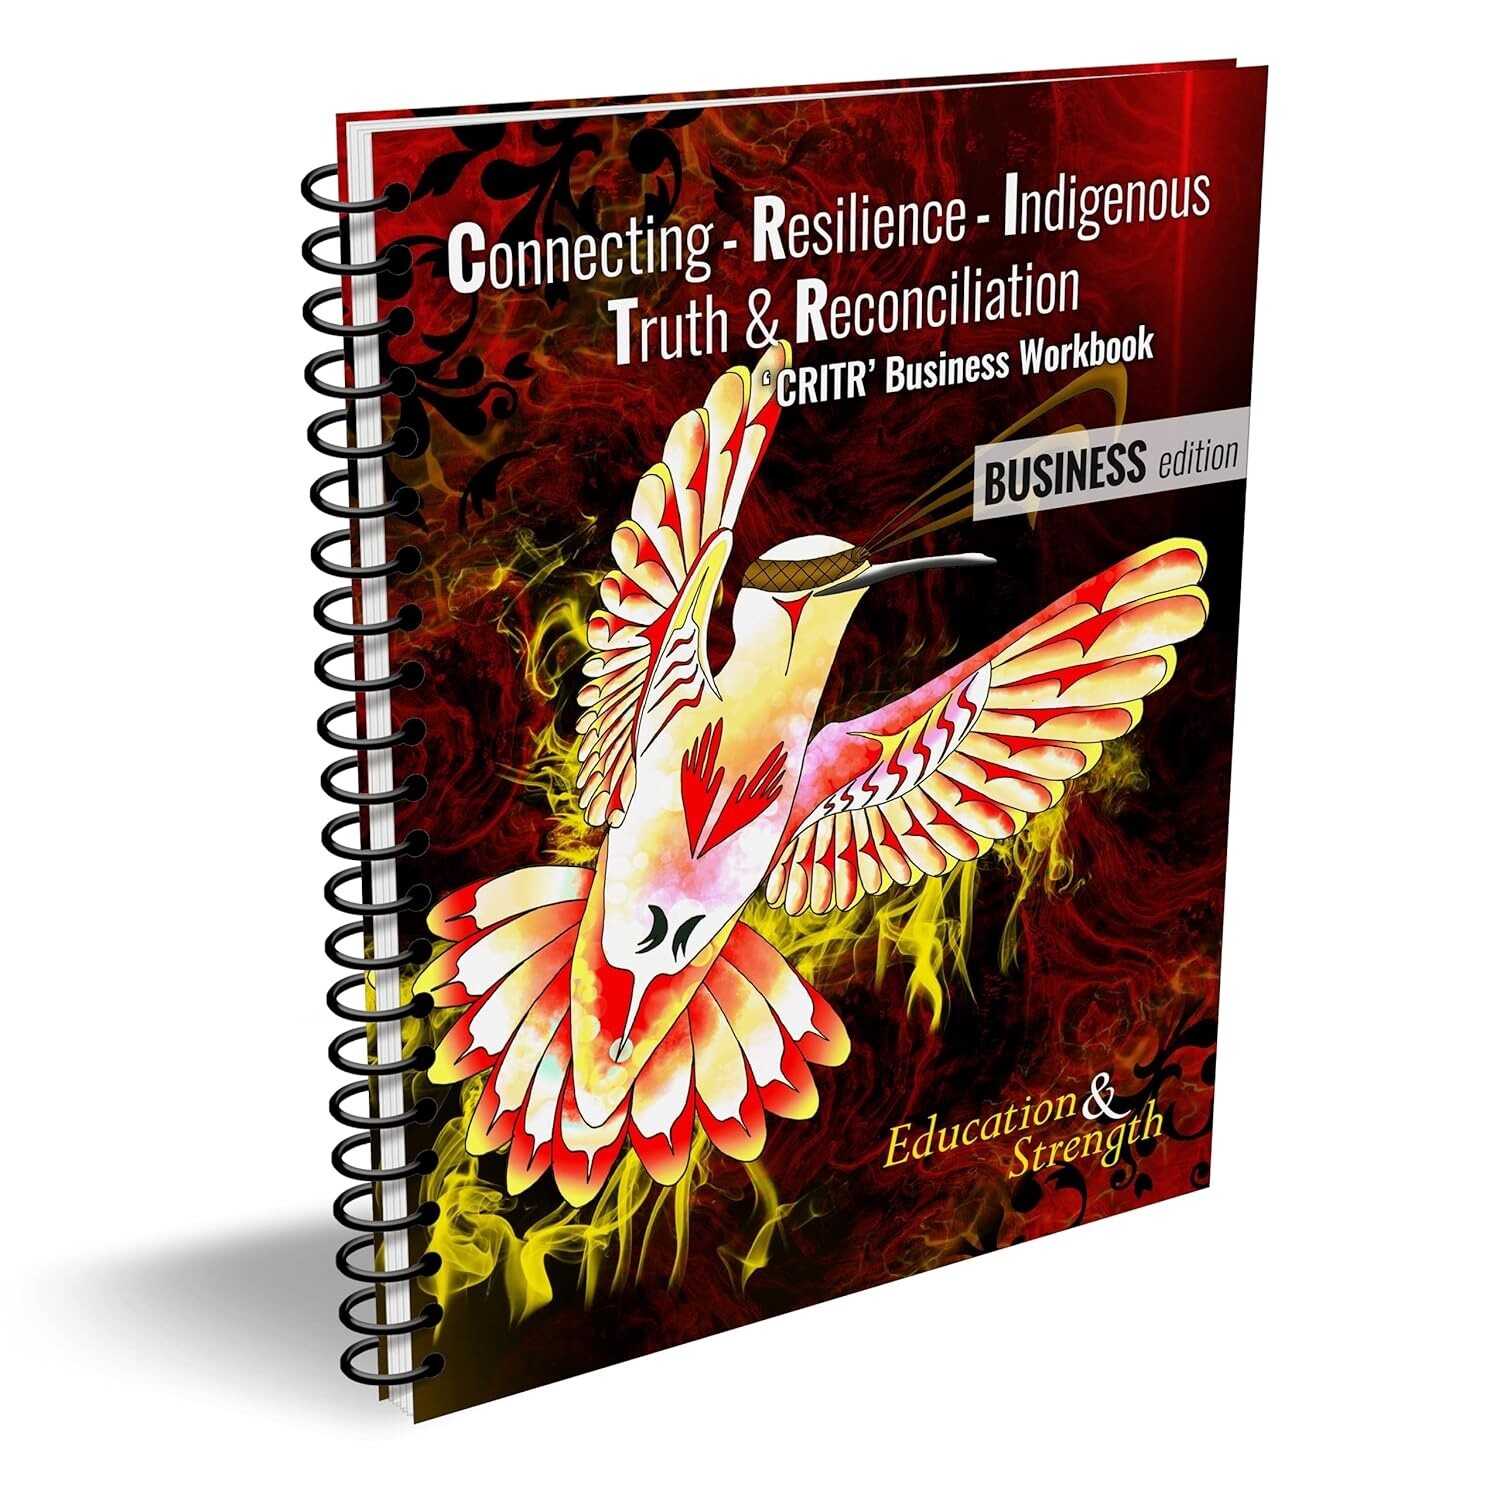 BOOK INDIGENOUS TRUTH &RECONCILIATION BUSINESS EDITION